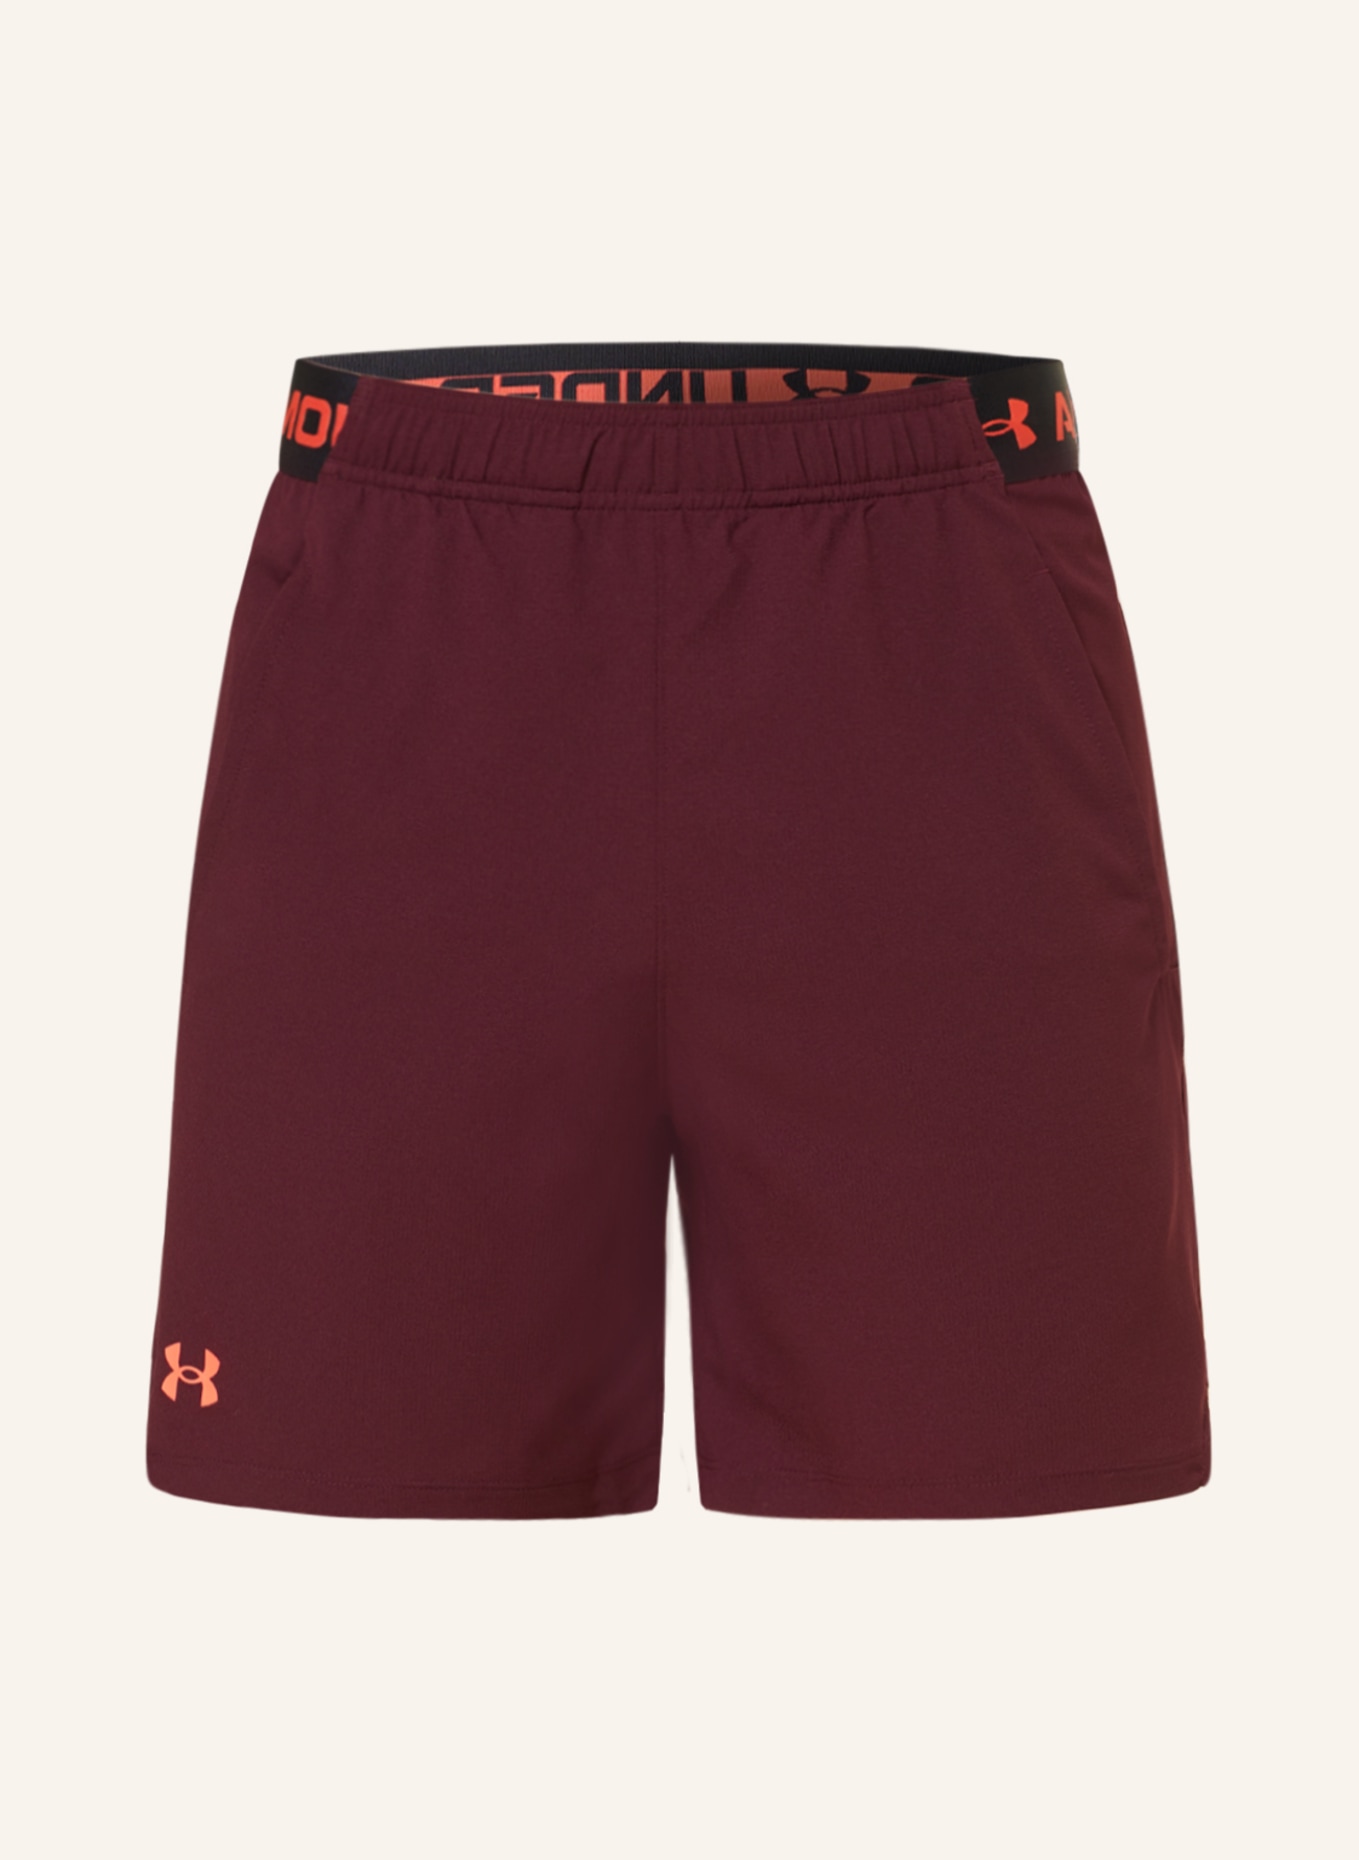 Under Armour Vanish woven shorts in red